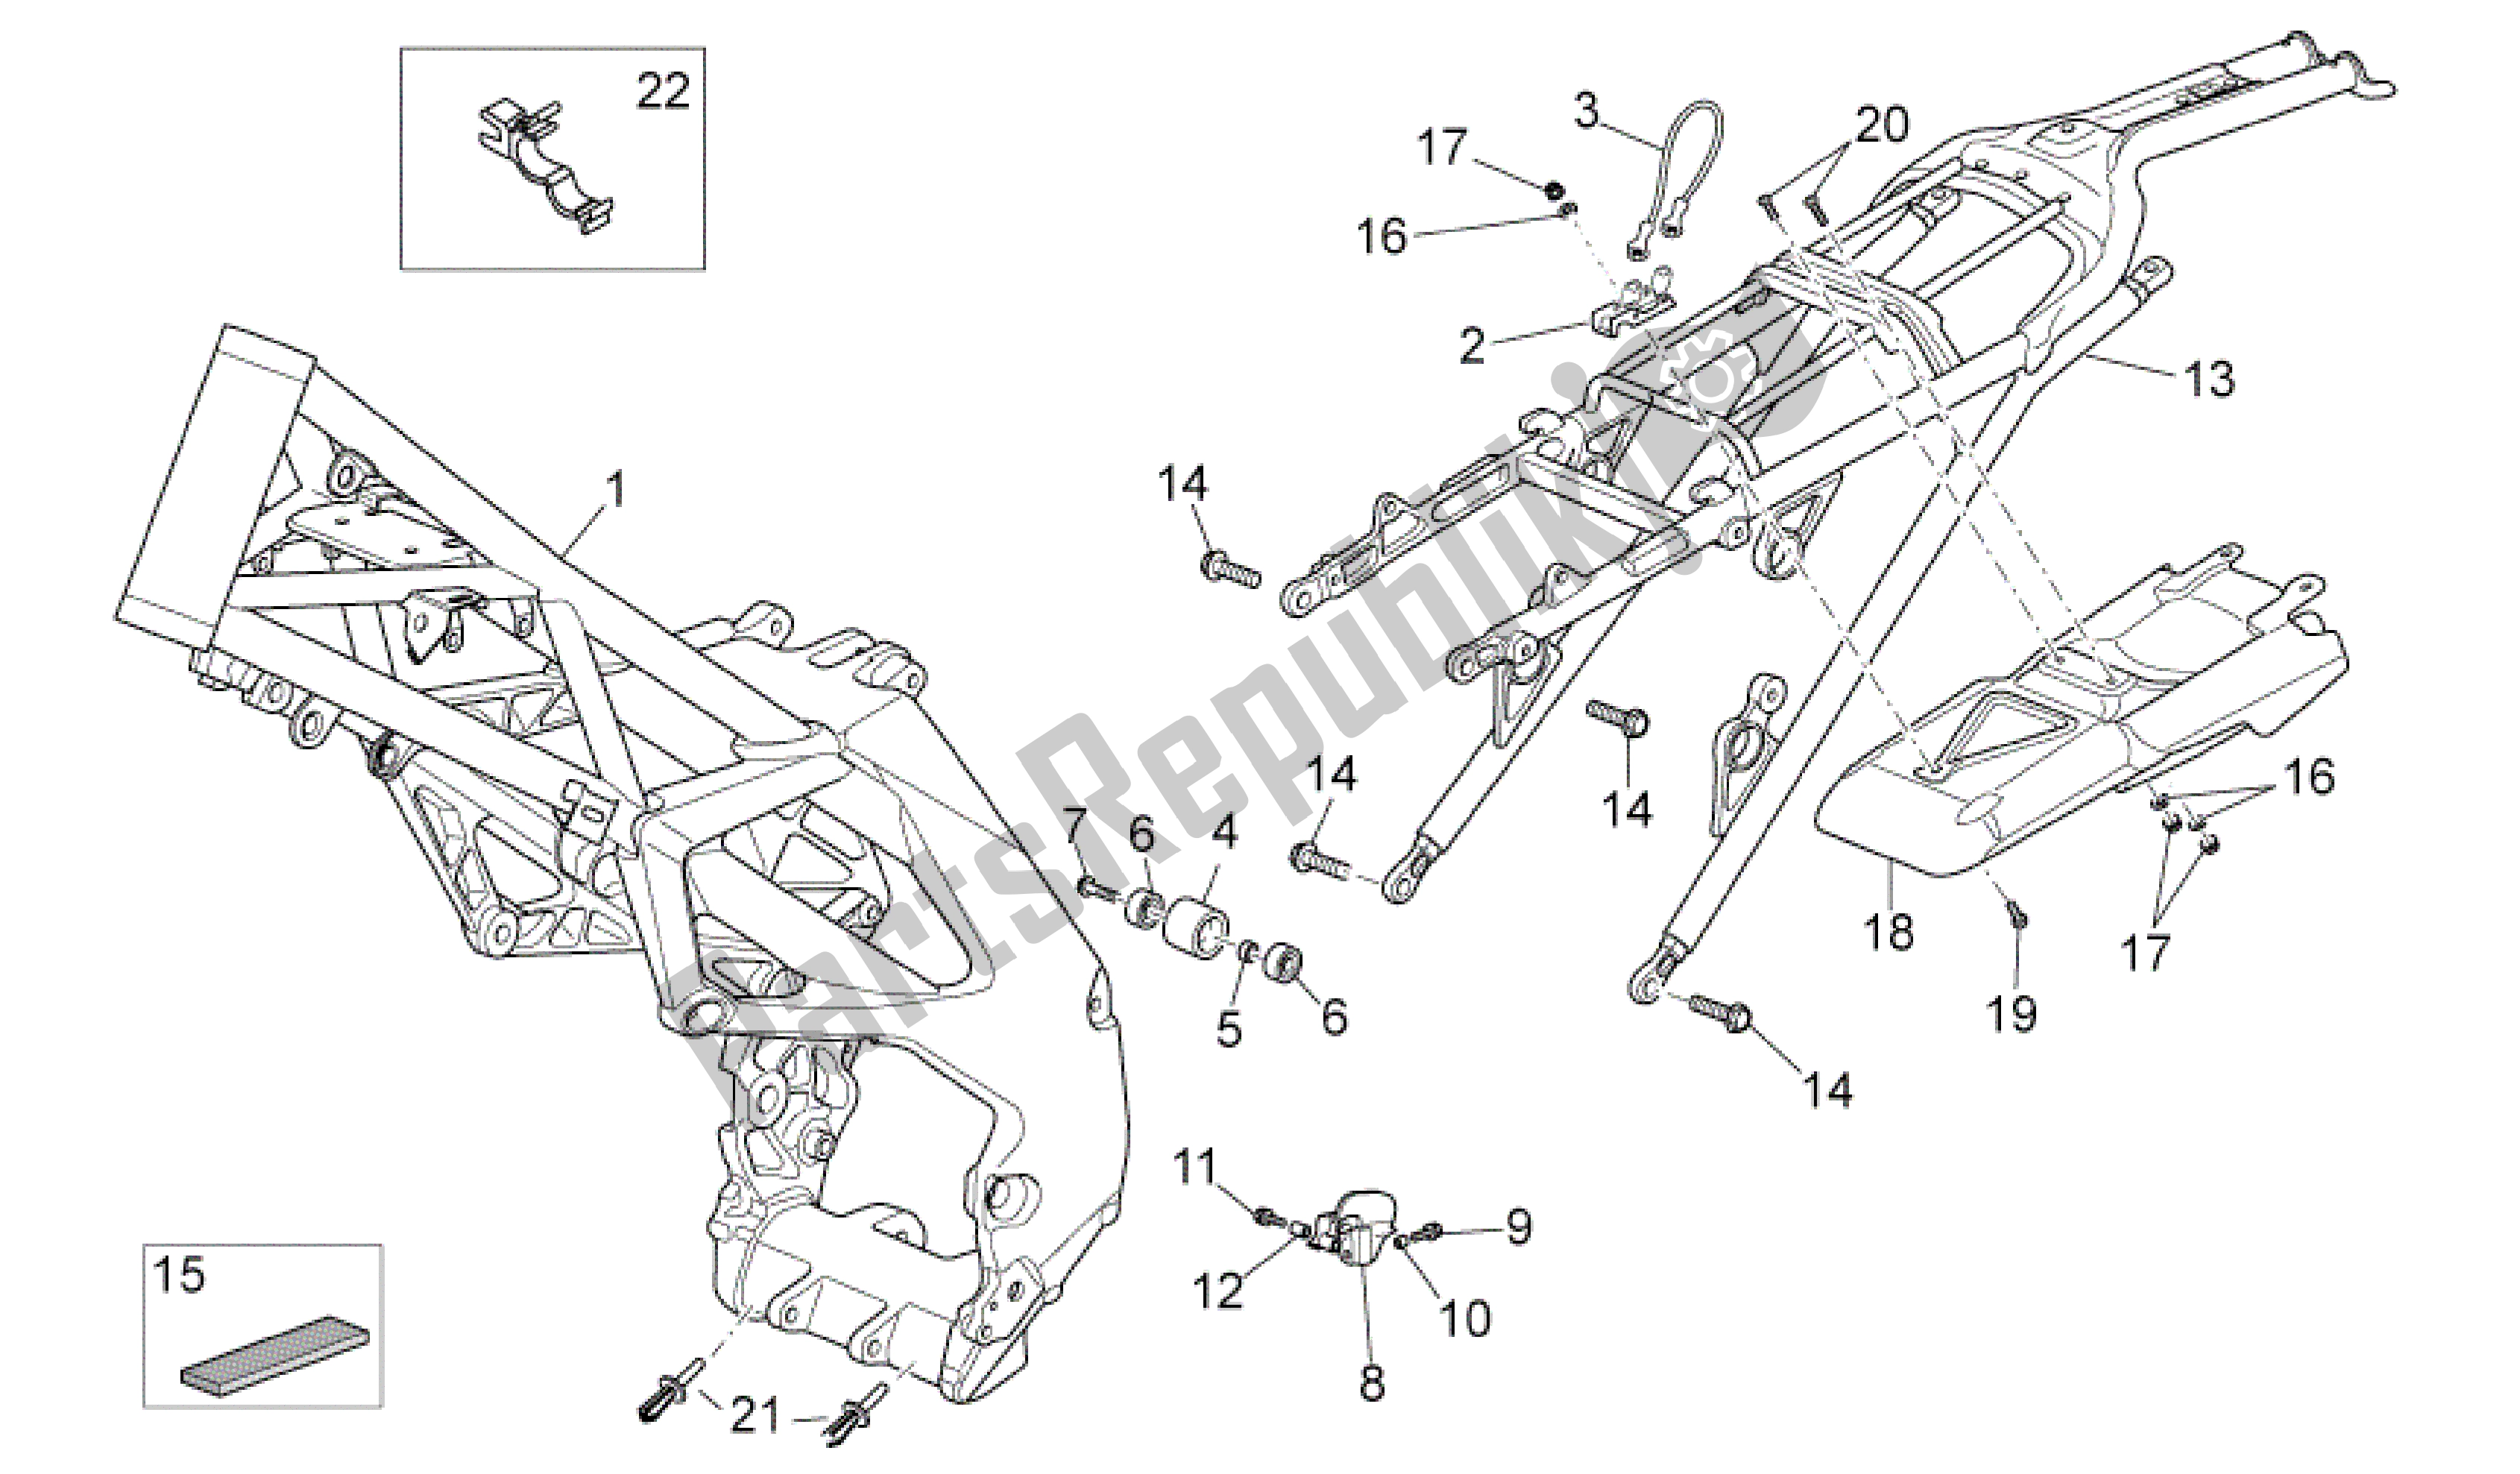 All parts for the Frame of the Aprilia SXV 550 2009 - 2011